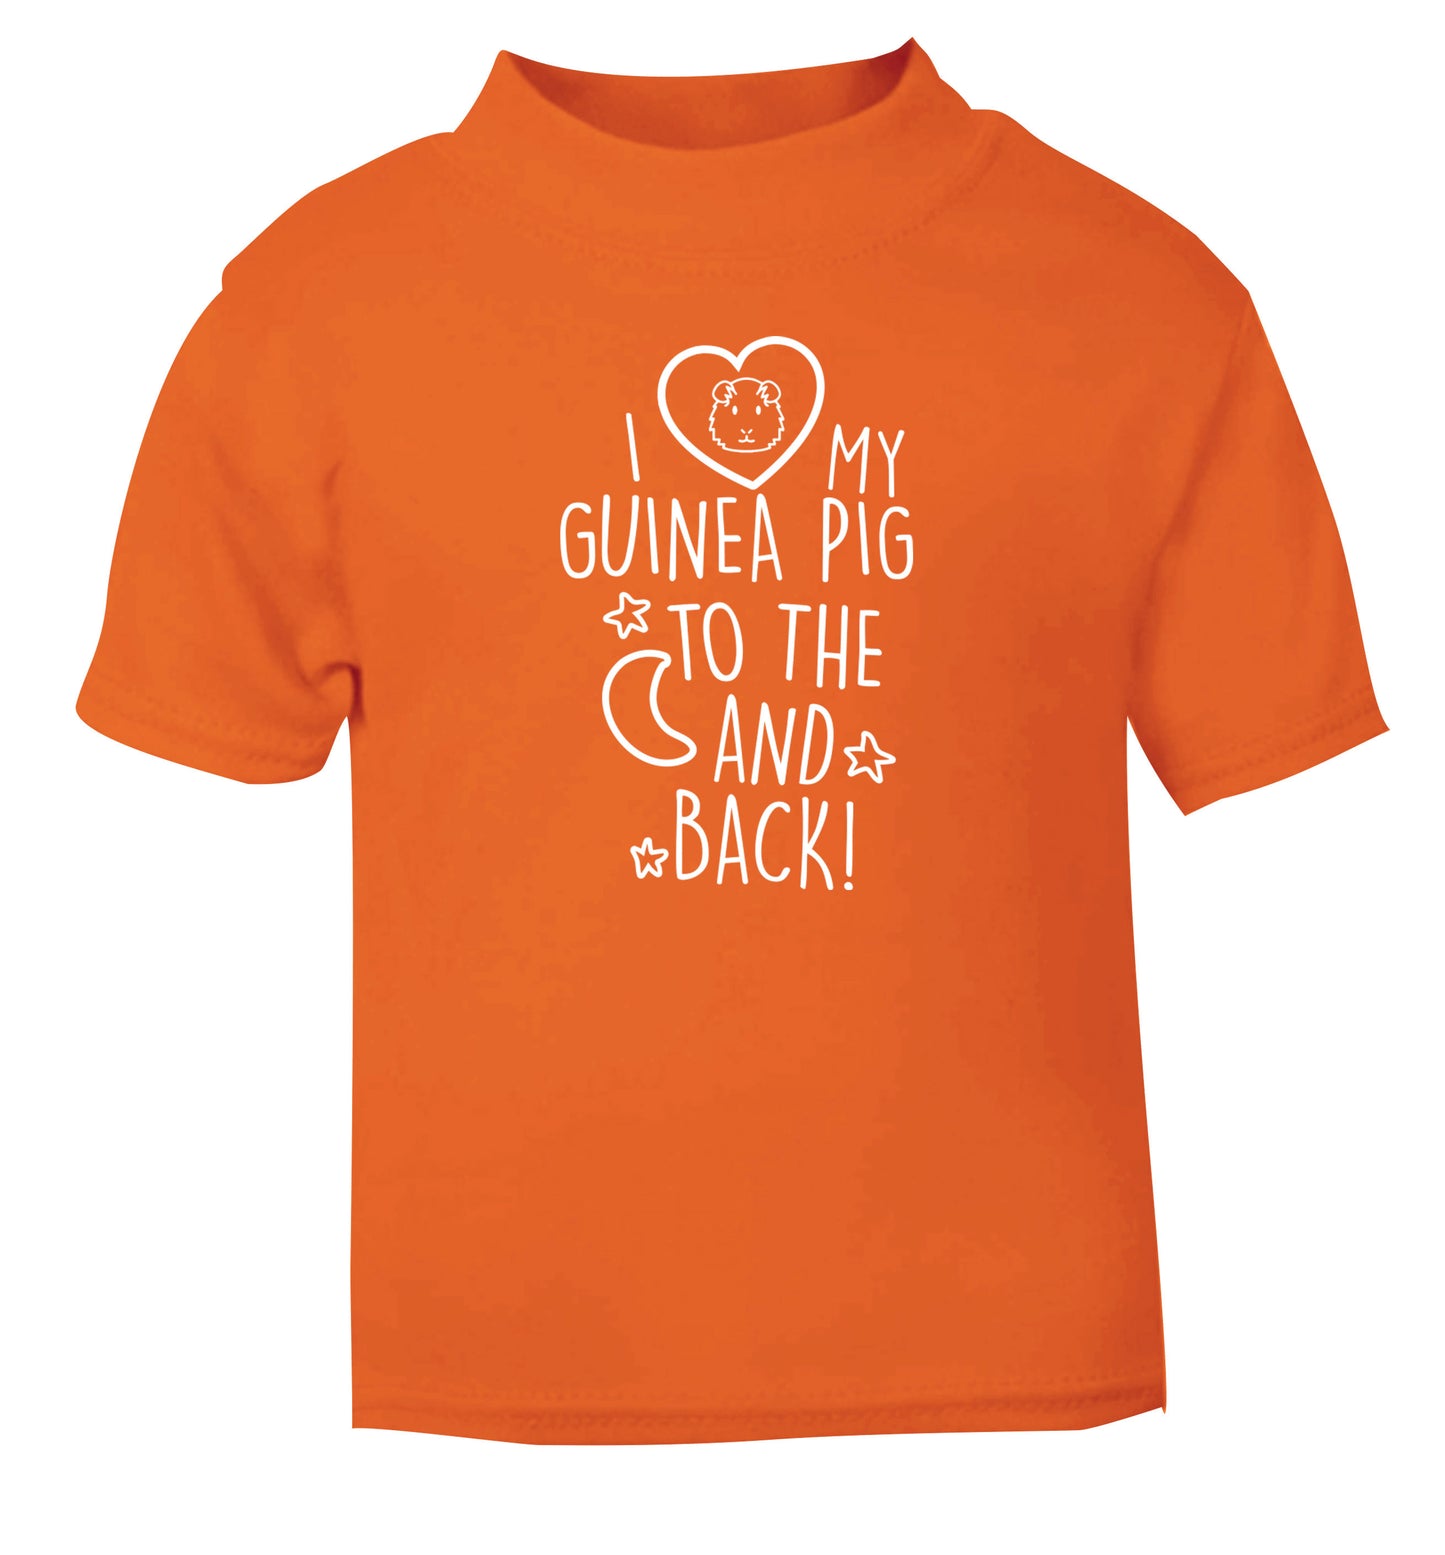 I love my guinea pig to the moon and back orange Baby Toddler Tshirt 2 Years